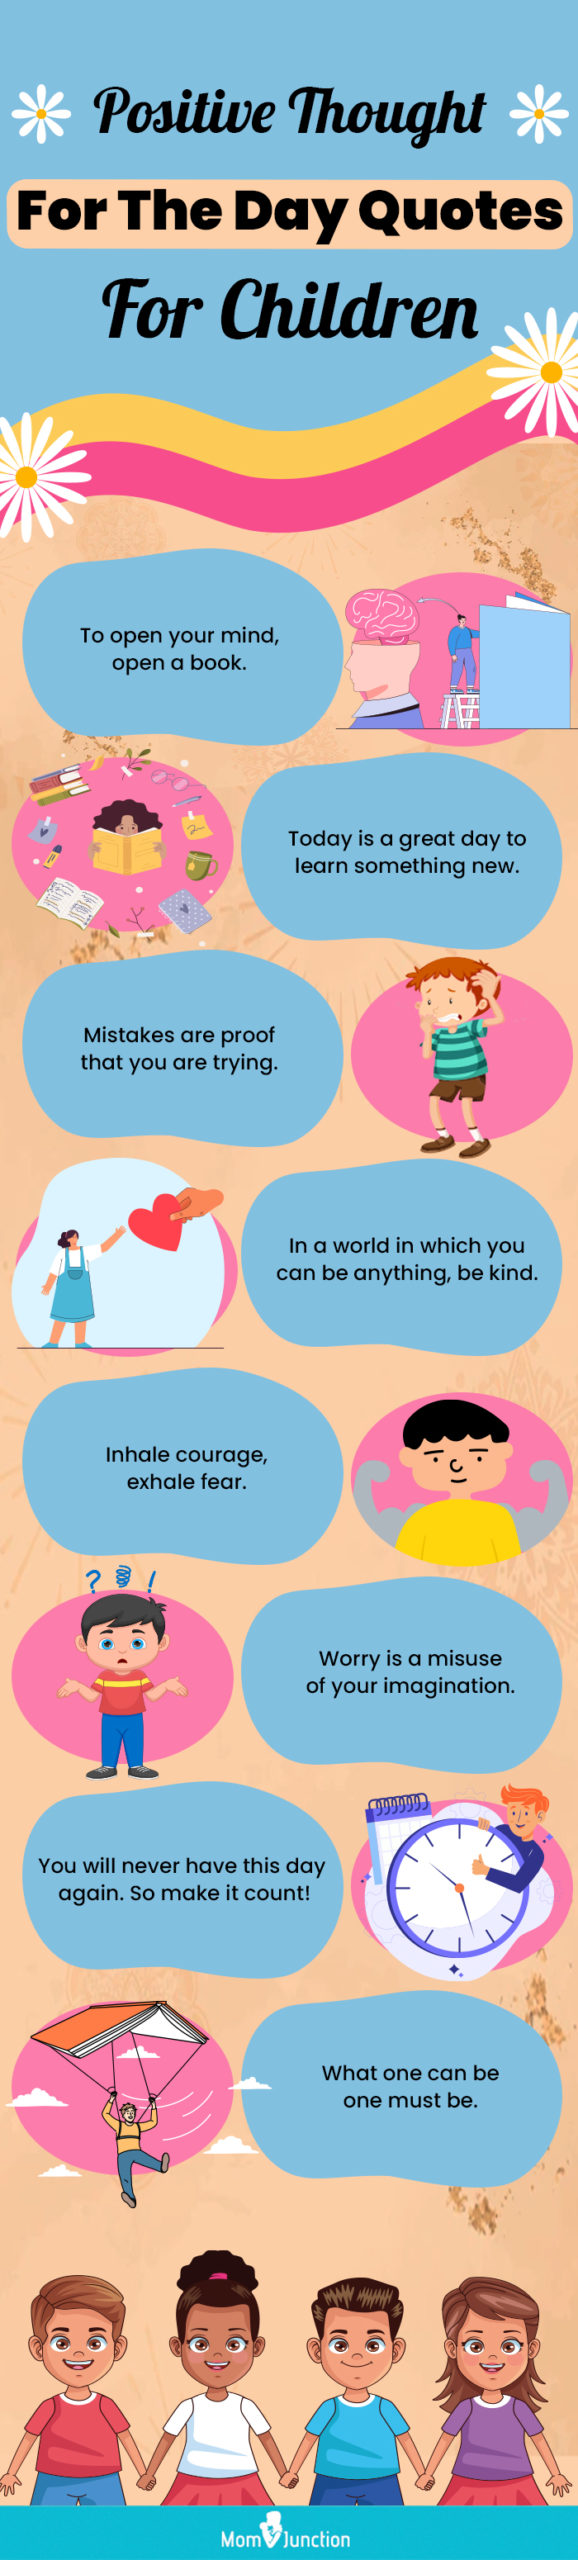 positive thoughts quotes for kids